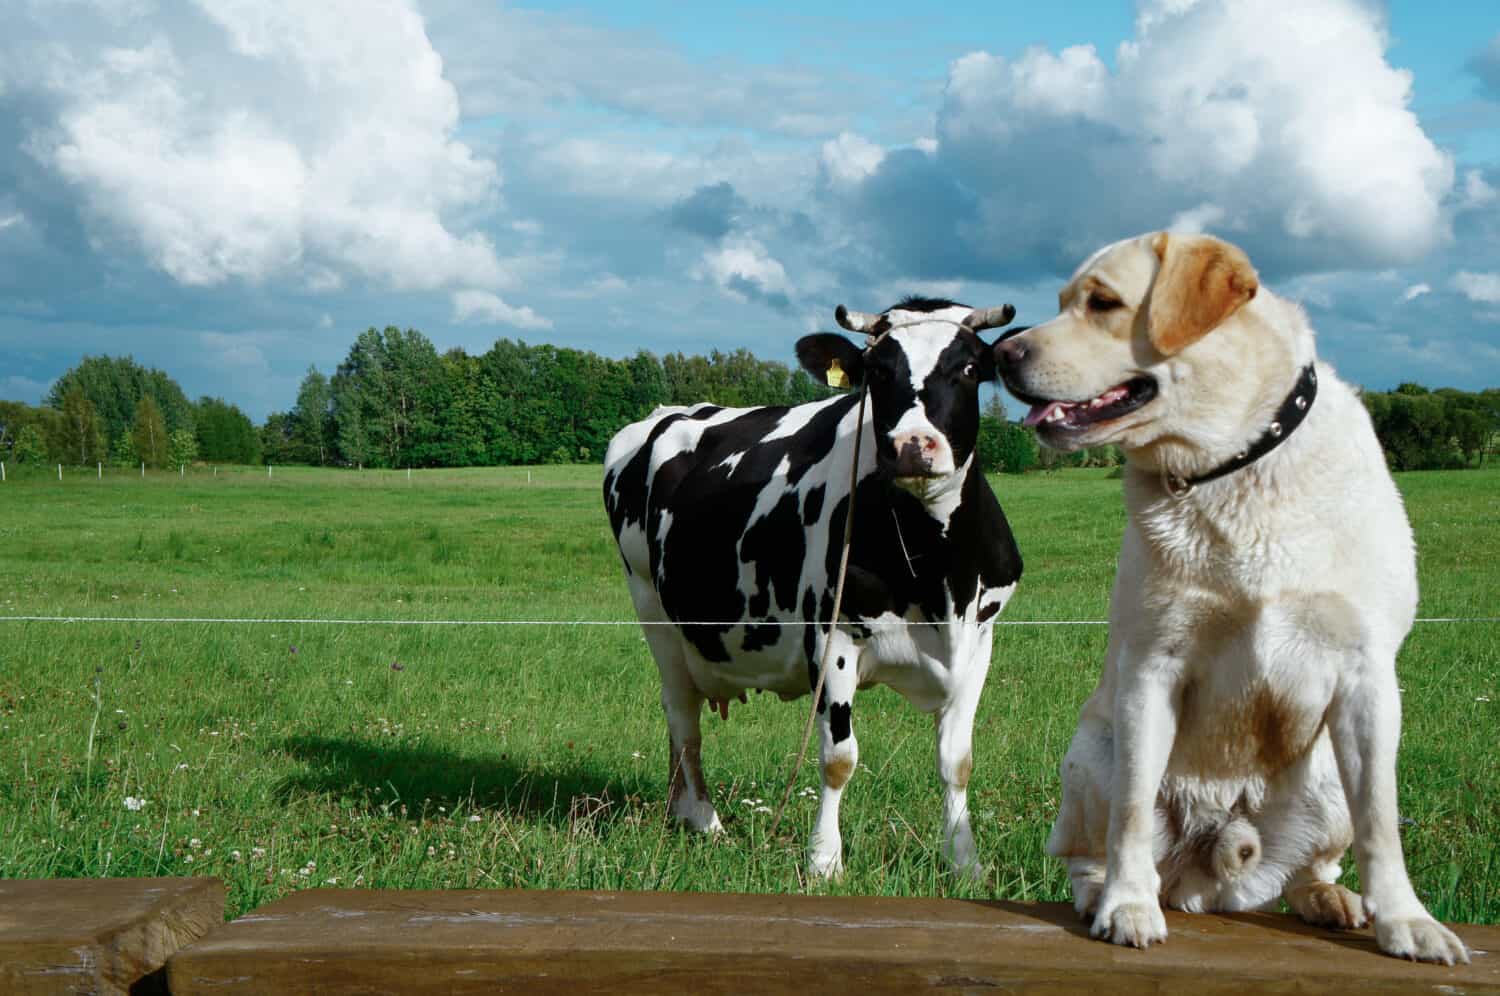 Labrador dog and cow friendship on a beautiful summer day